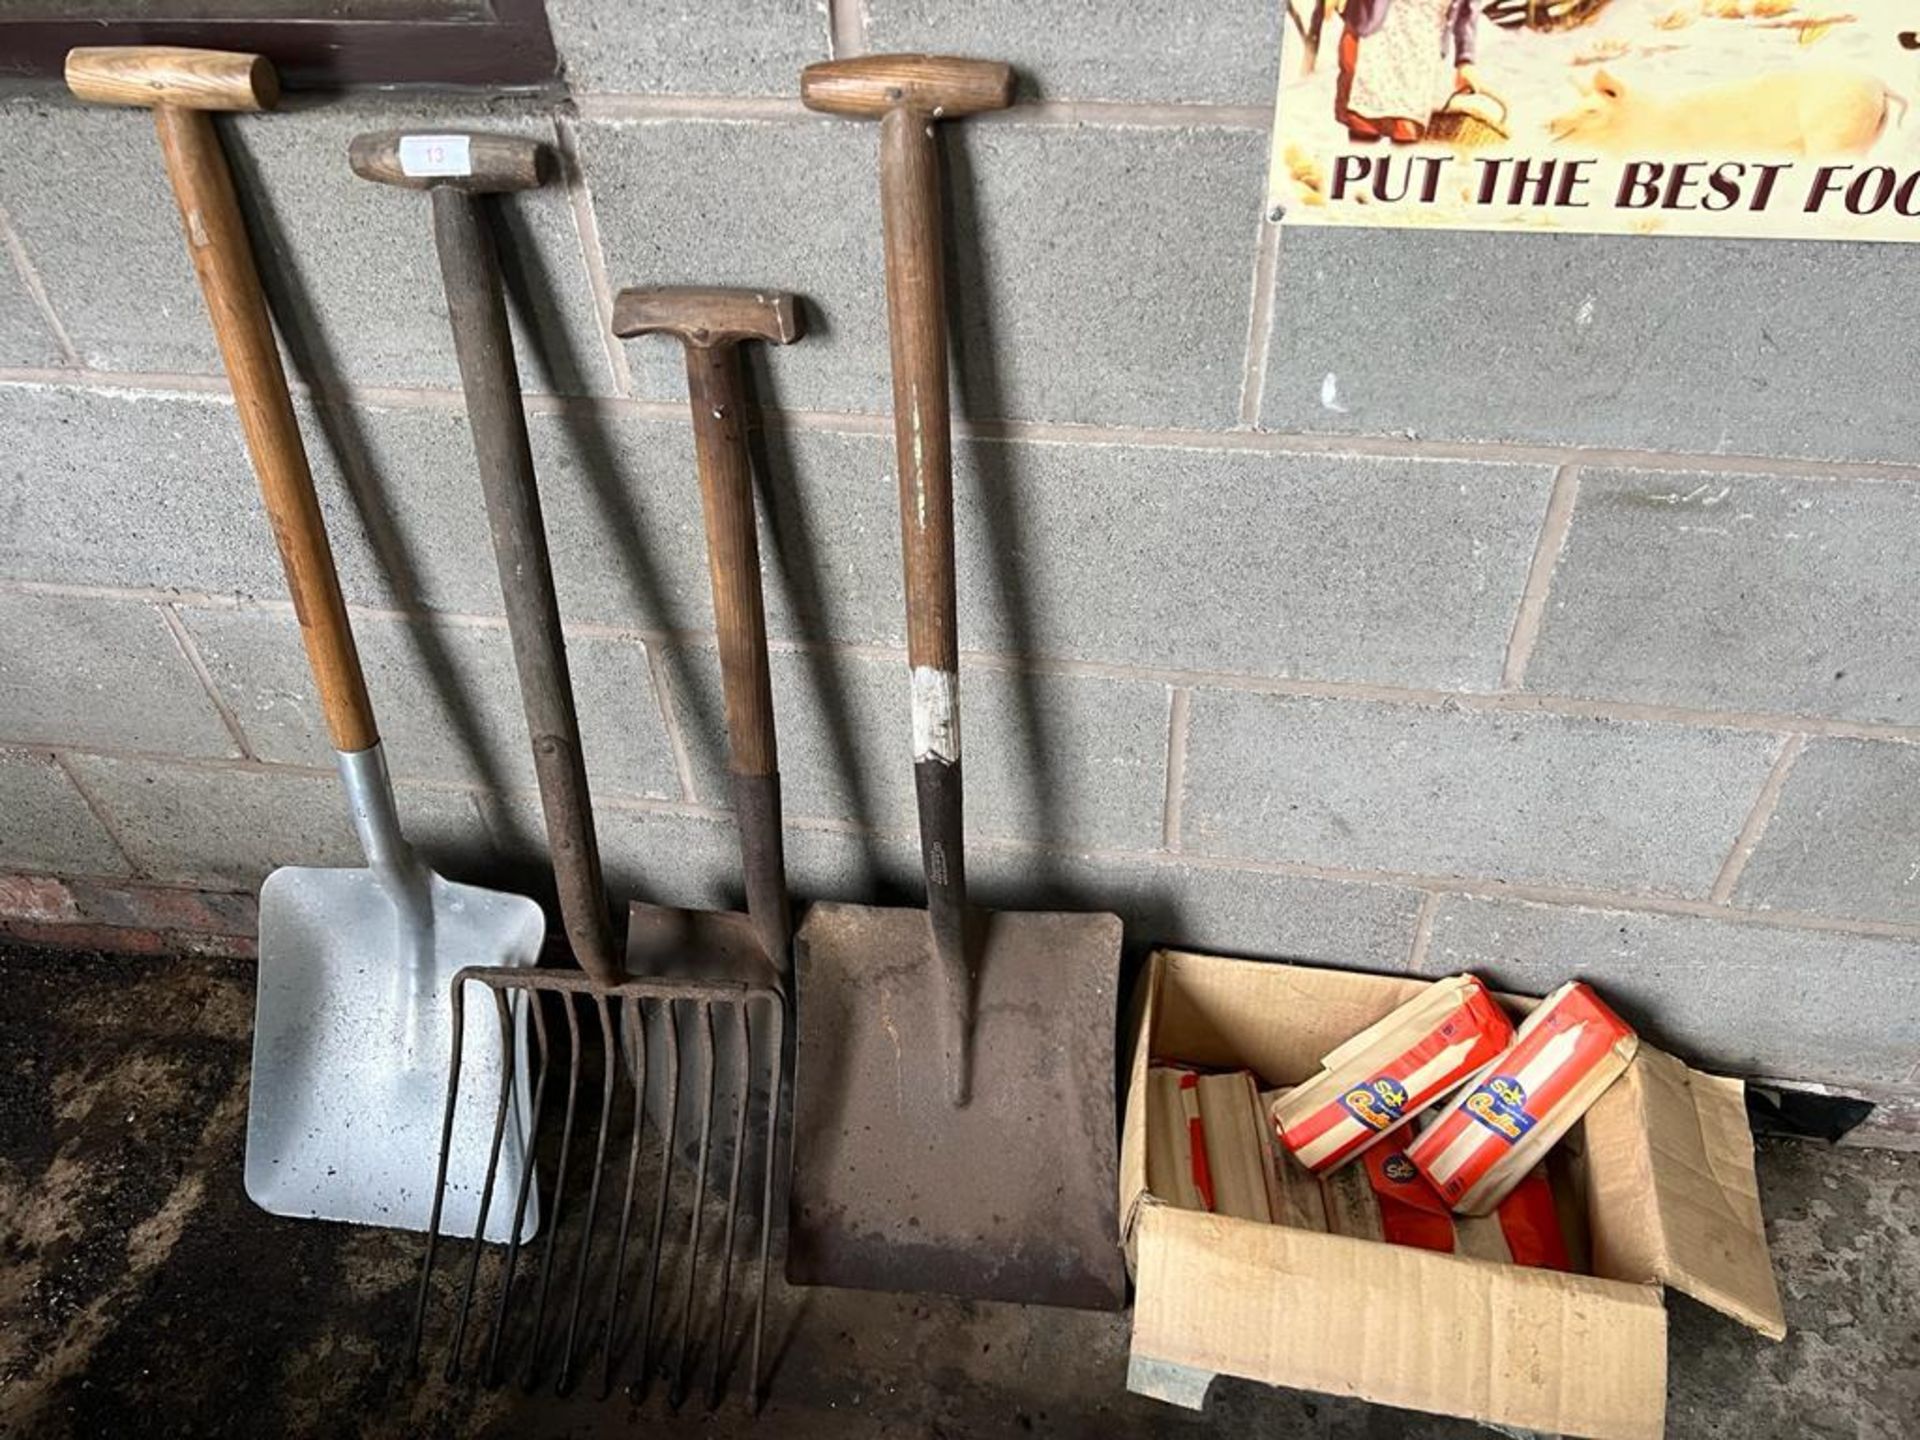 THREE SHOVELS, A POTATO FORK AND A BOX OF CANDLES (FORK HANDLES NOT 4 CANDLES) - Image 2 of 3